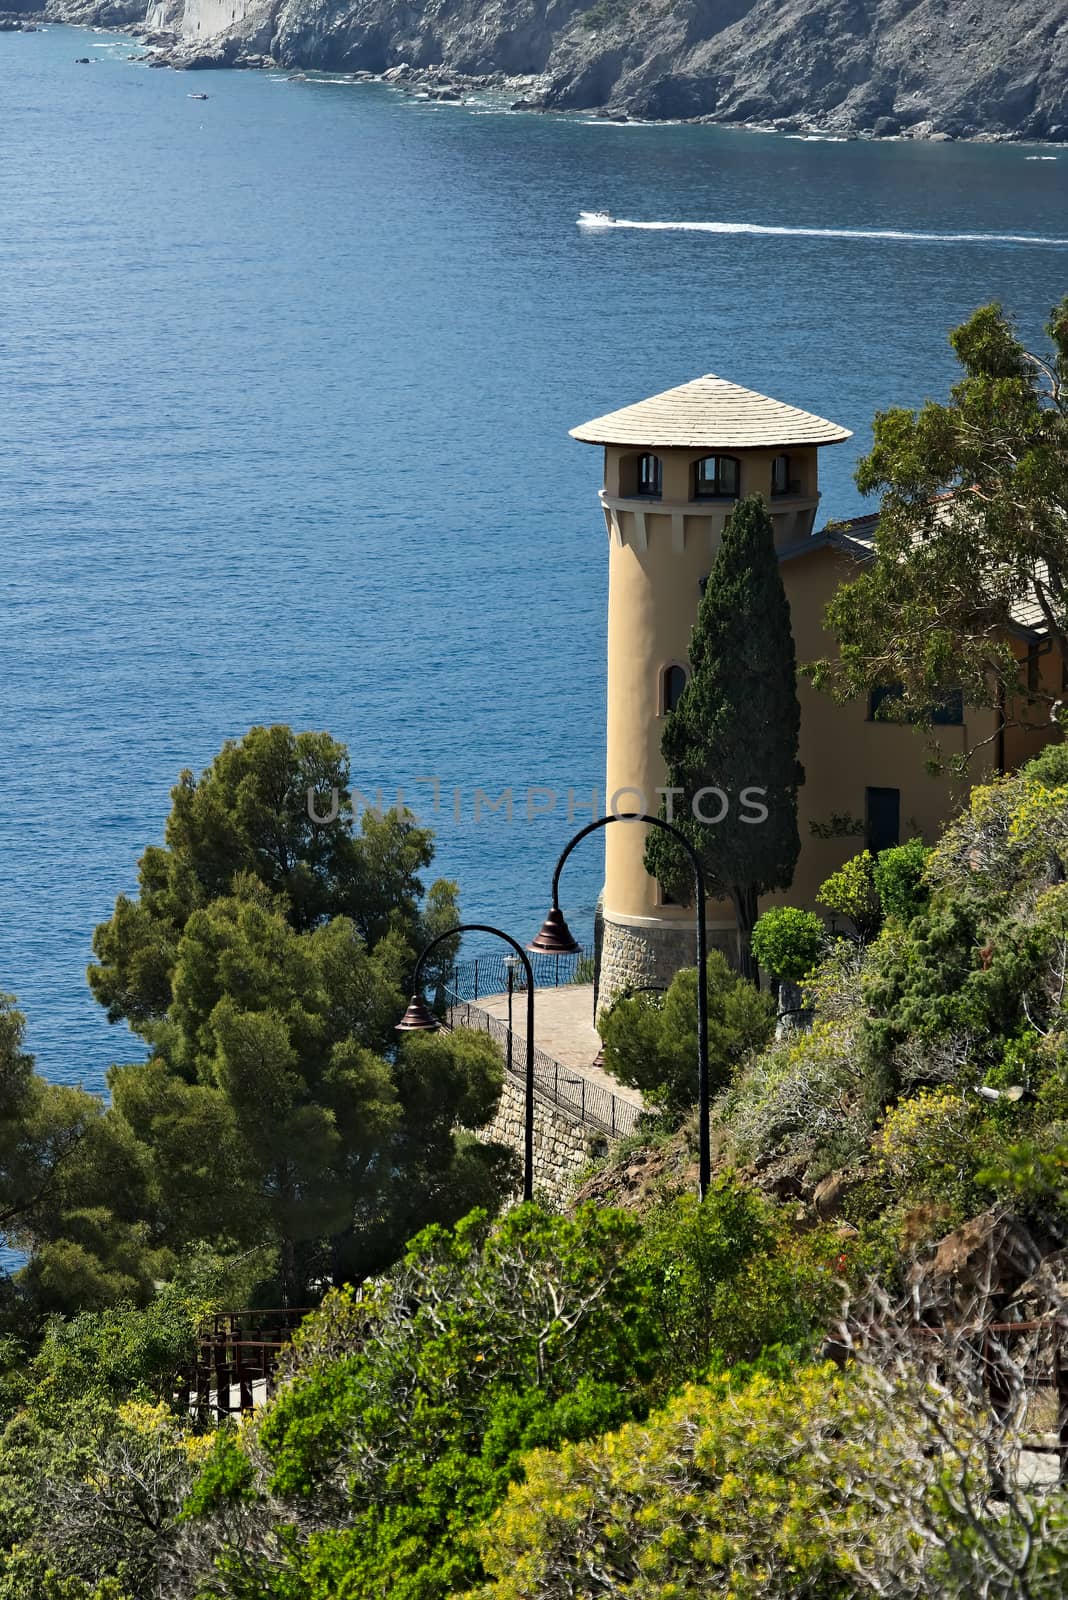 Seascape with house turret near the Cinque Terre. In the village of Framura a villa with a tower overlooking the blue sea and dense Mediterranean vegetation.